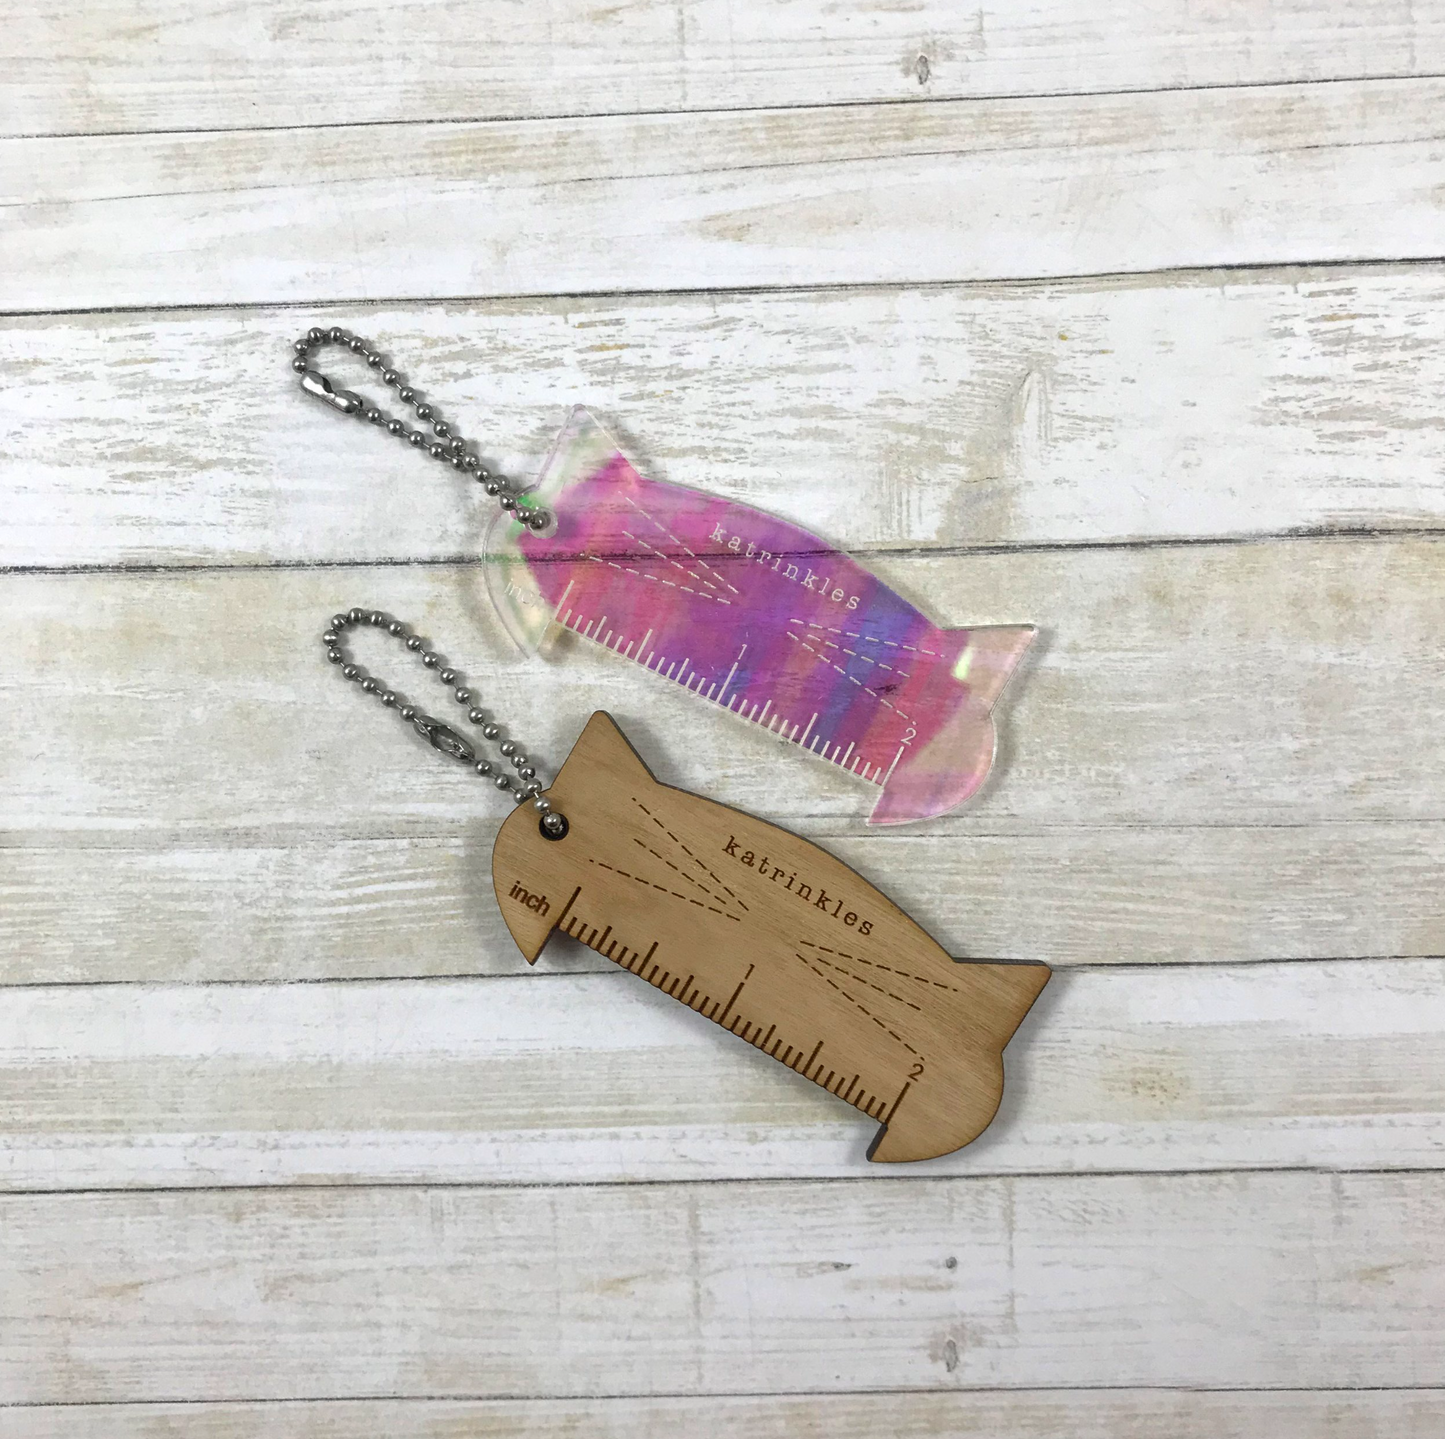 Cat-rinkles Cat Collection - Acrylic or Wooden 2" Ruler Key Chain